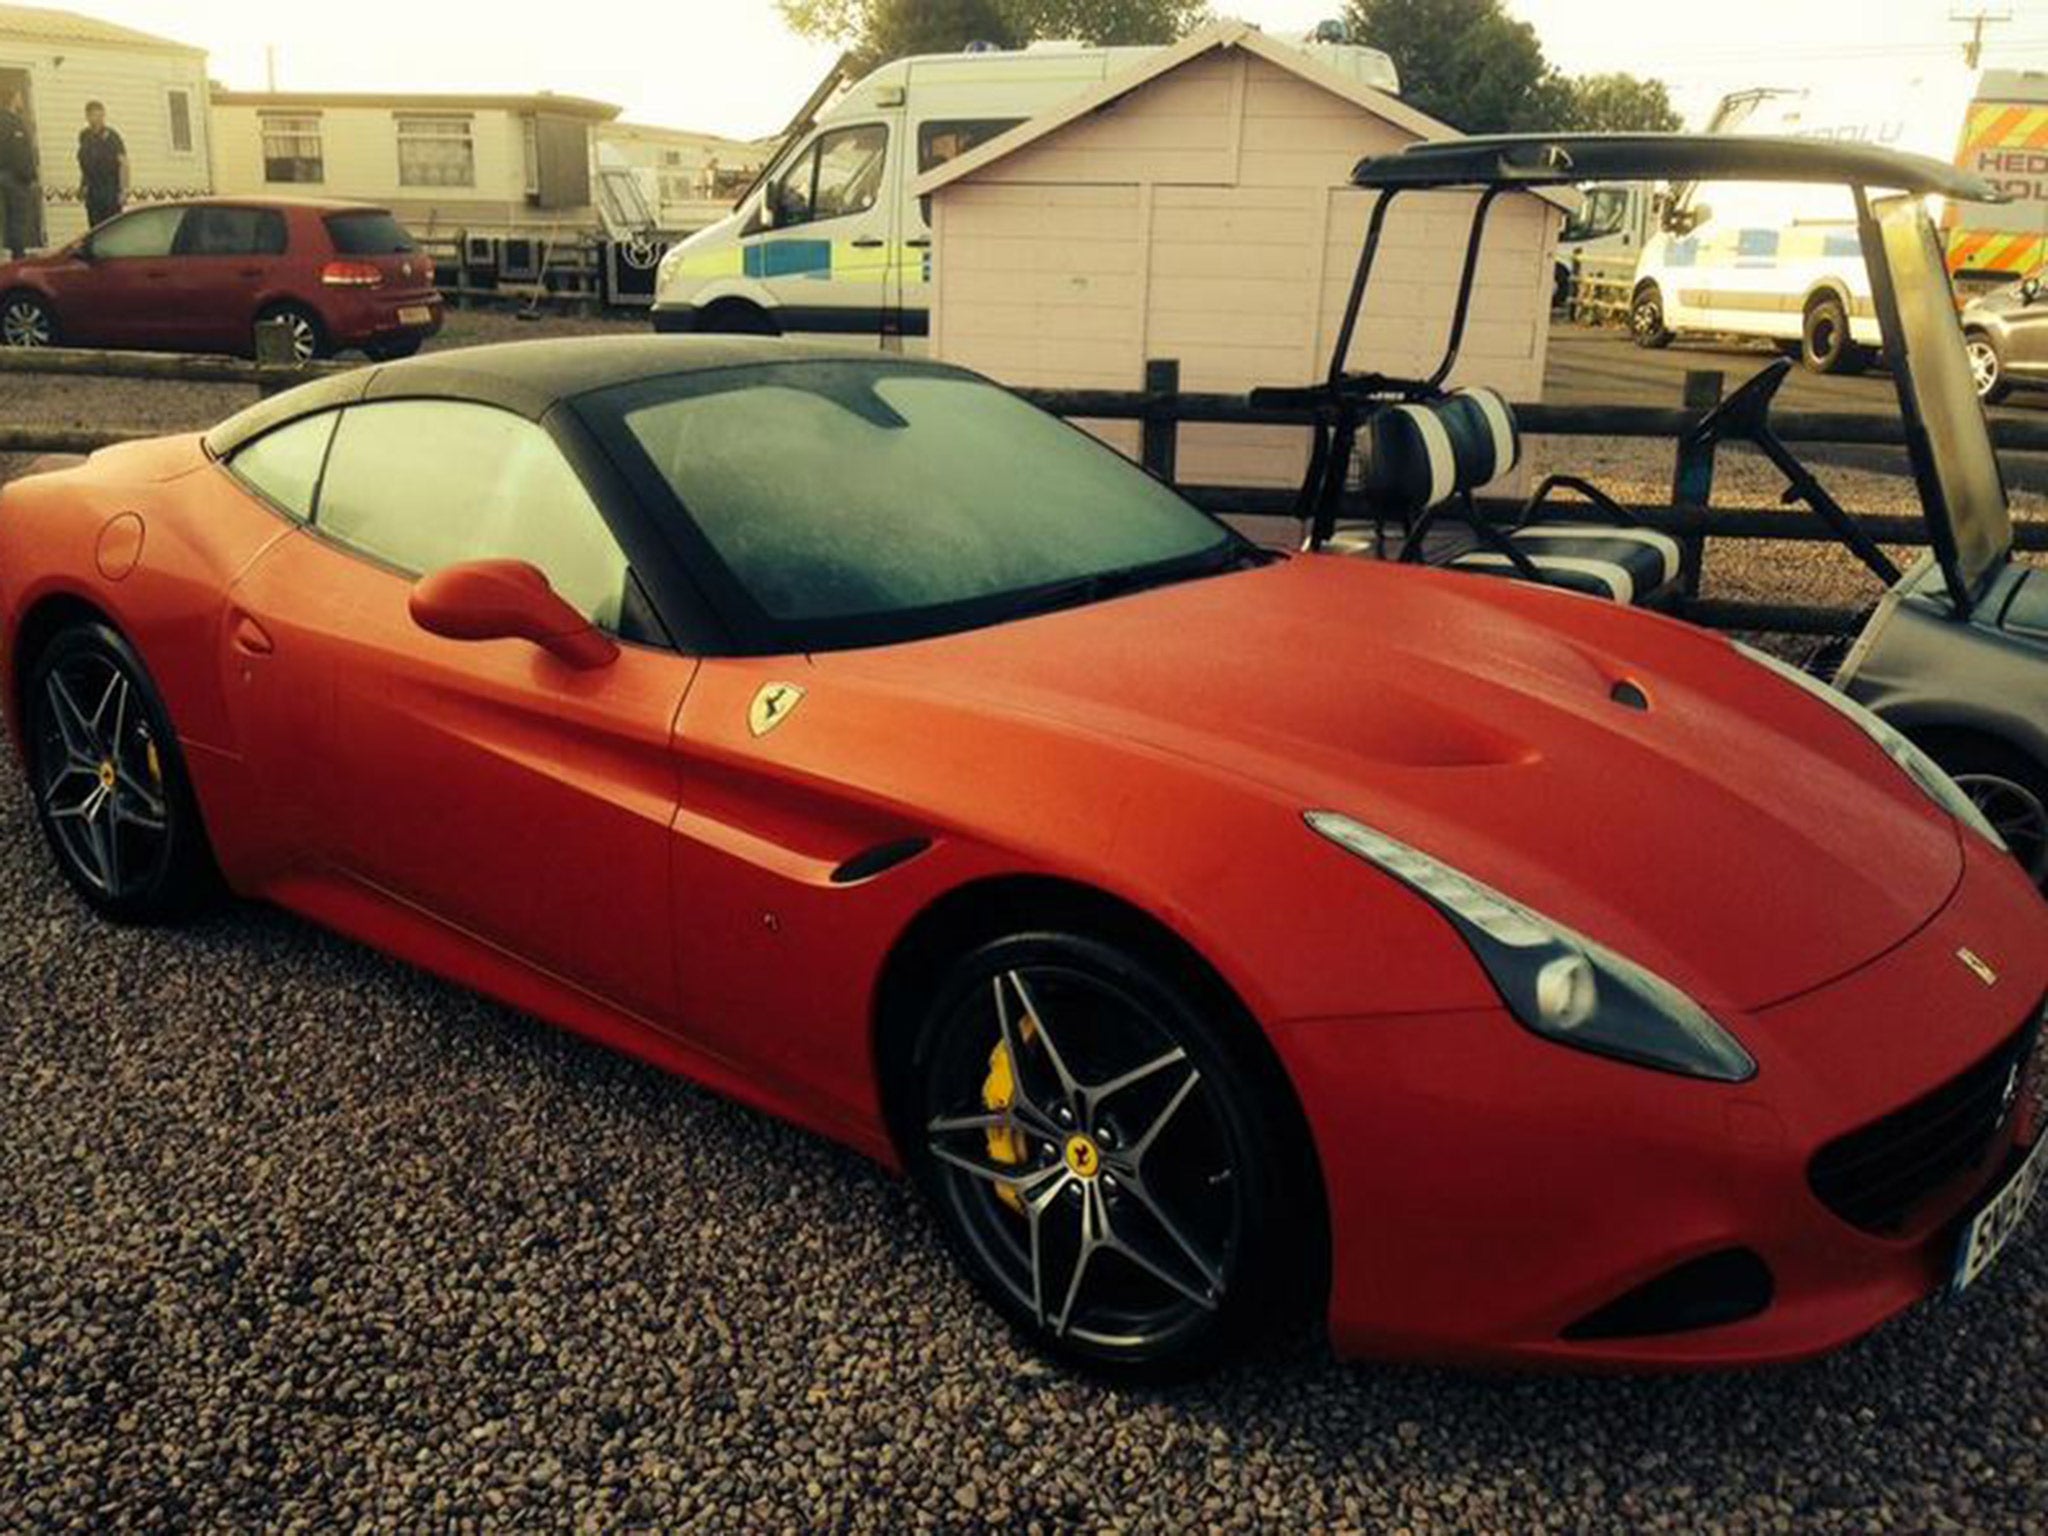 A red Ferrari California T was among the cars seized by Welsh police